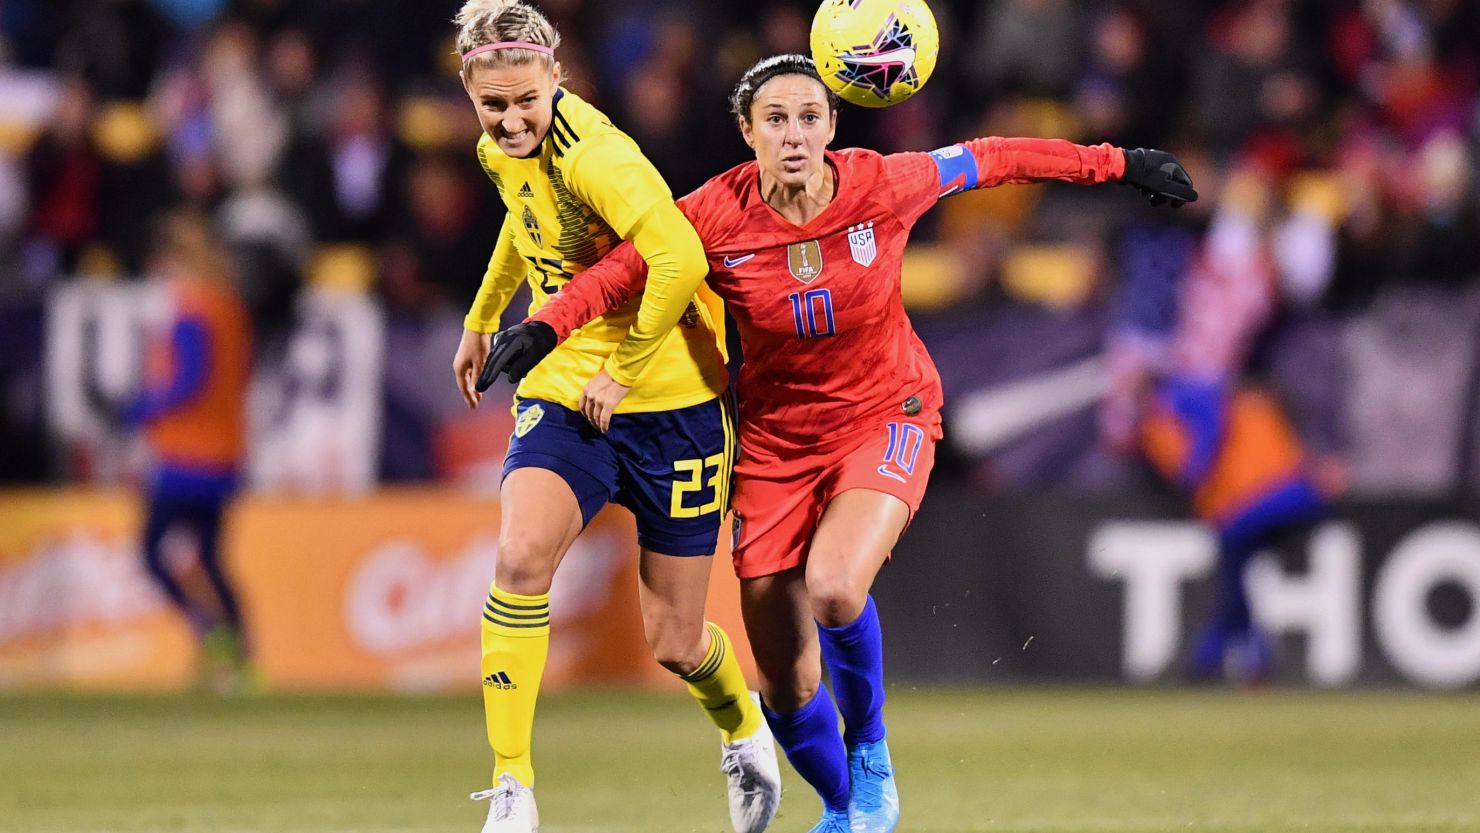 Carli Lloyd said she's using the downtime during the pandemic to focus on her training and said she isn't ruling out a possible move to the NFL.